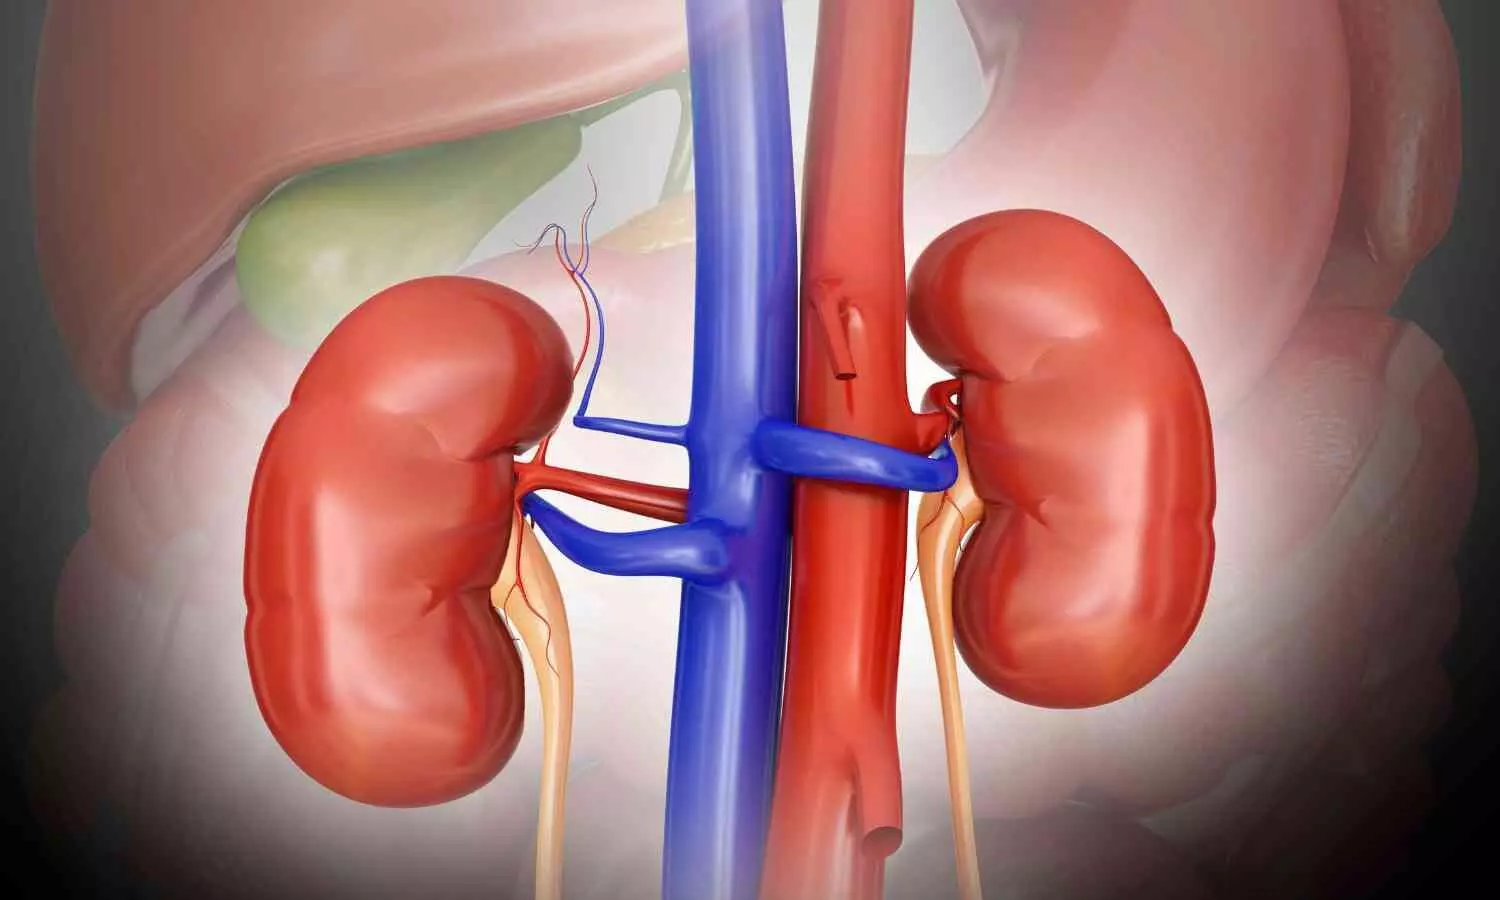 Reduced bodily fluids and low salt may aid in kidney cell regeneration: study